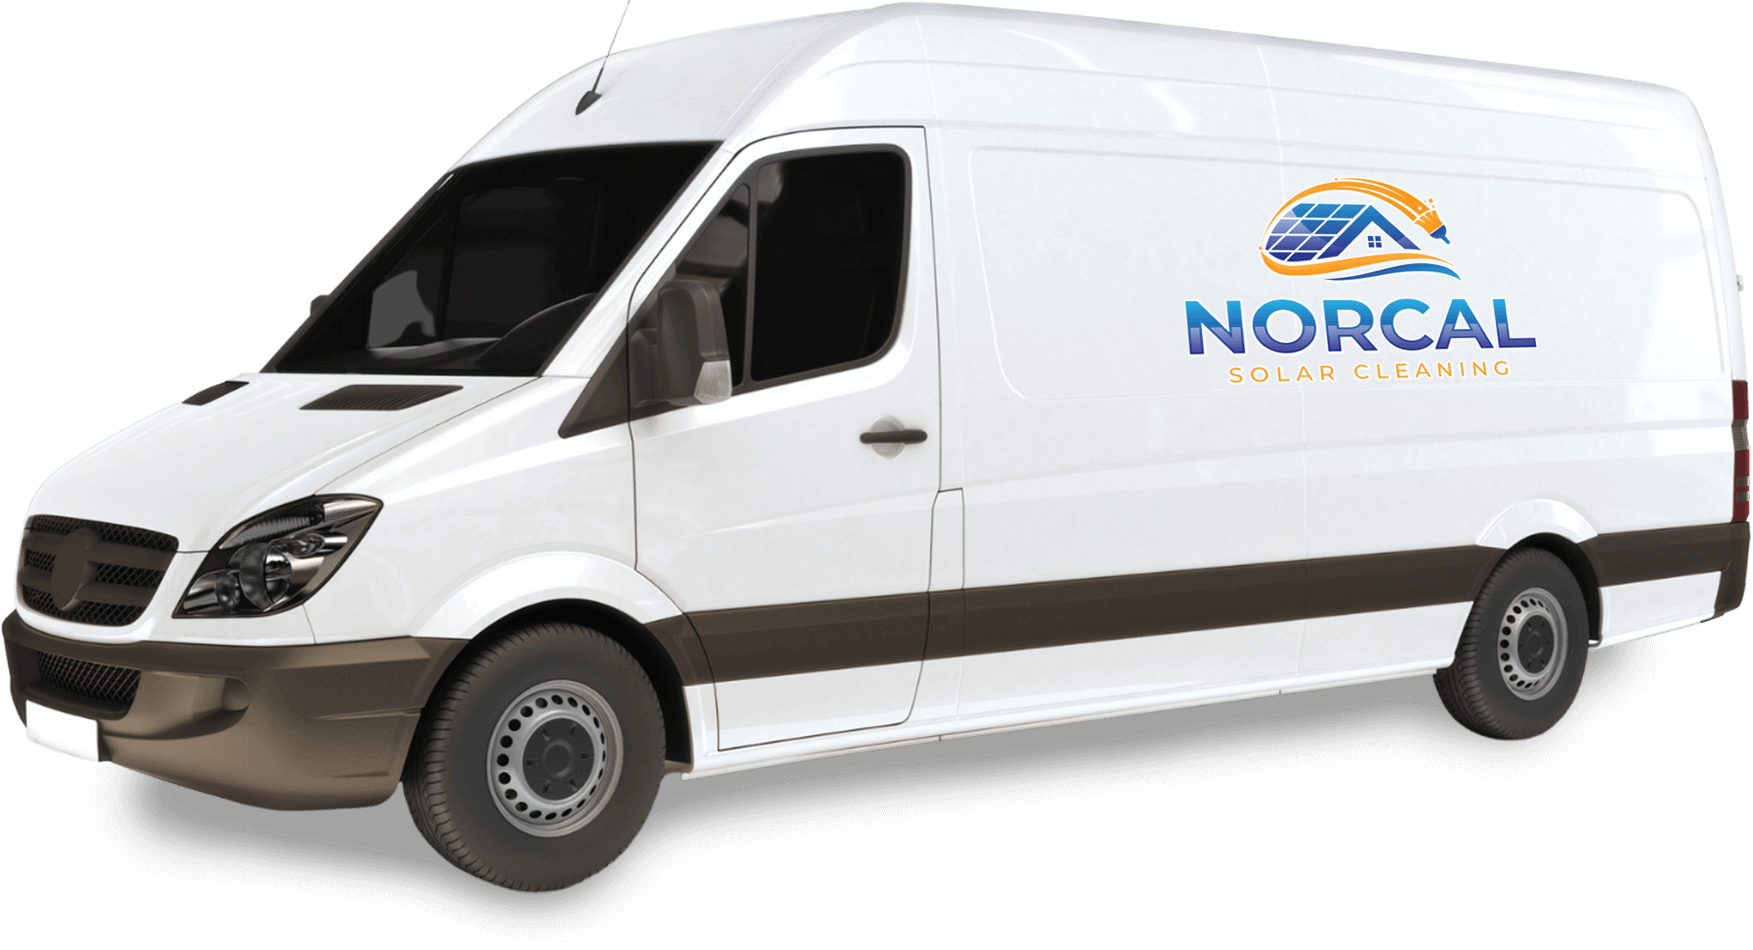 NorCal Solar Panel Cleaning Company van